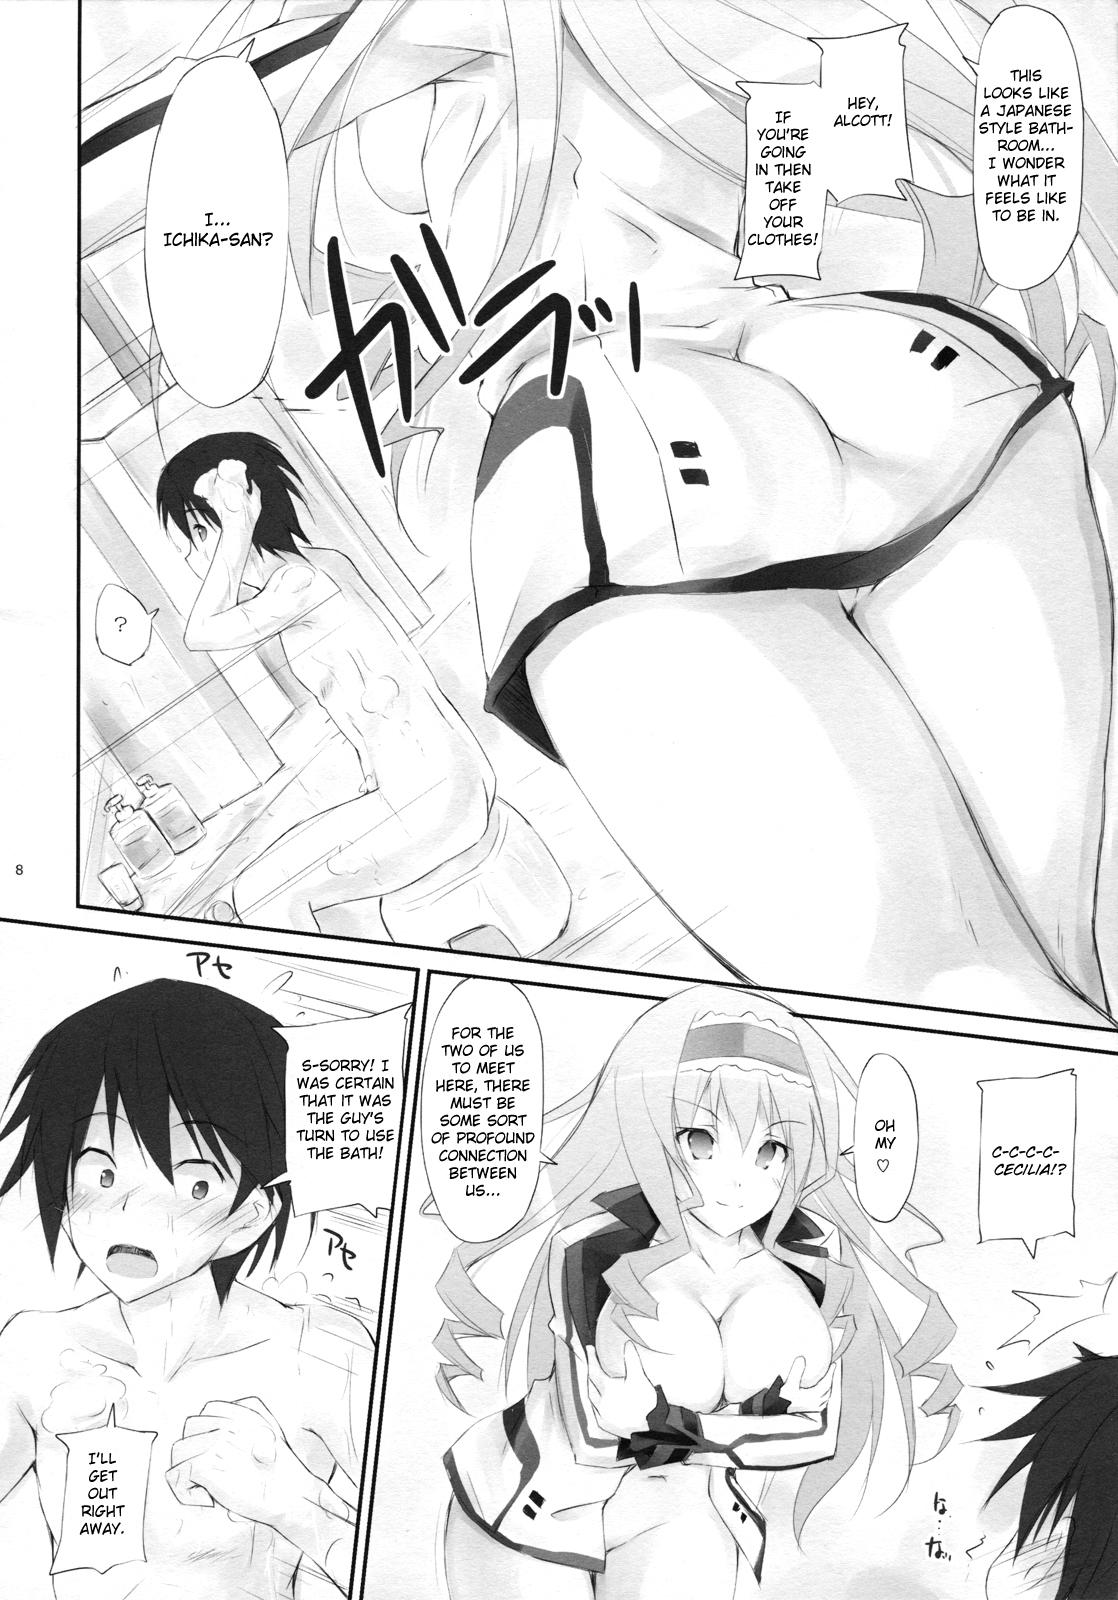 Hot Girls Getting Fucked Purple Storm - Infinite stratos Couple Porn - Page 7